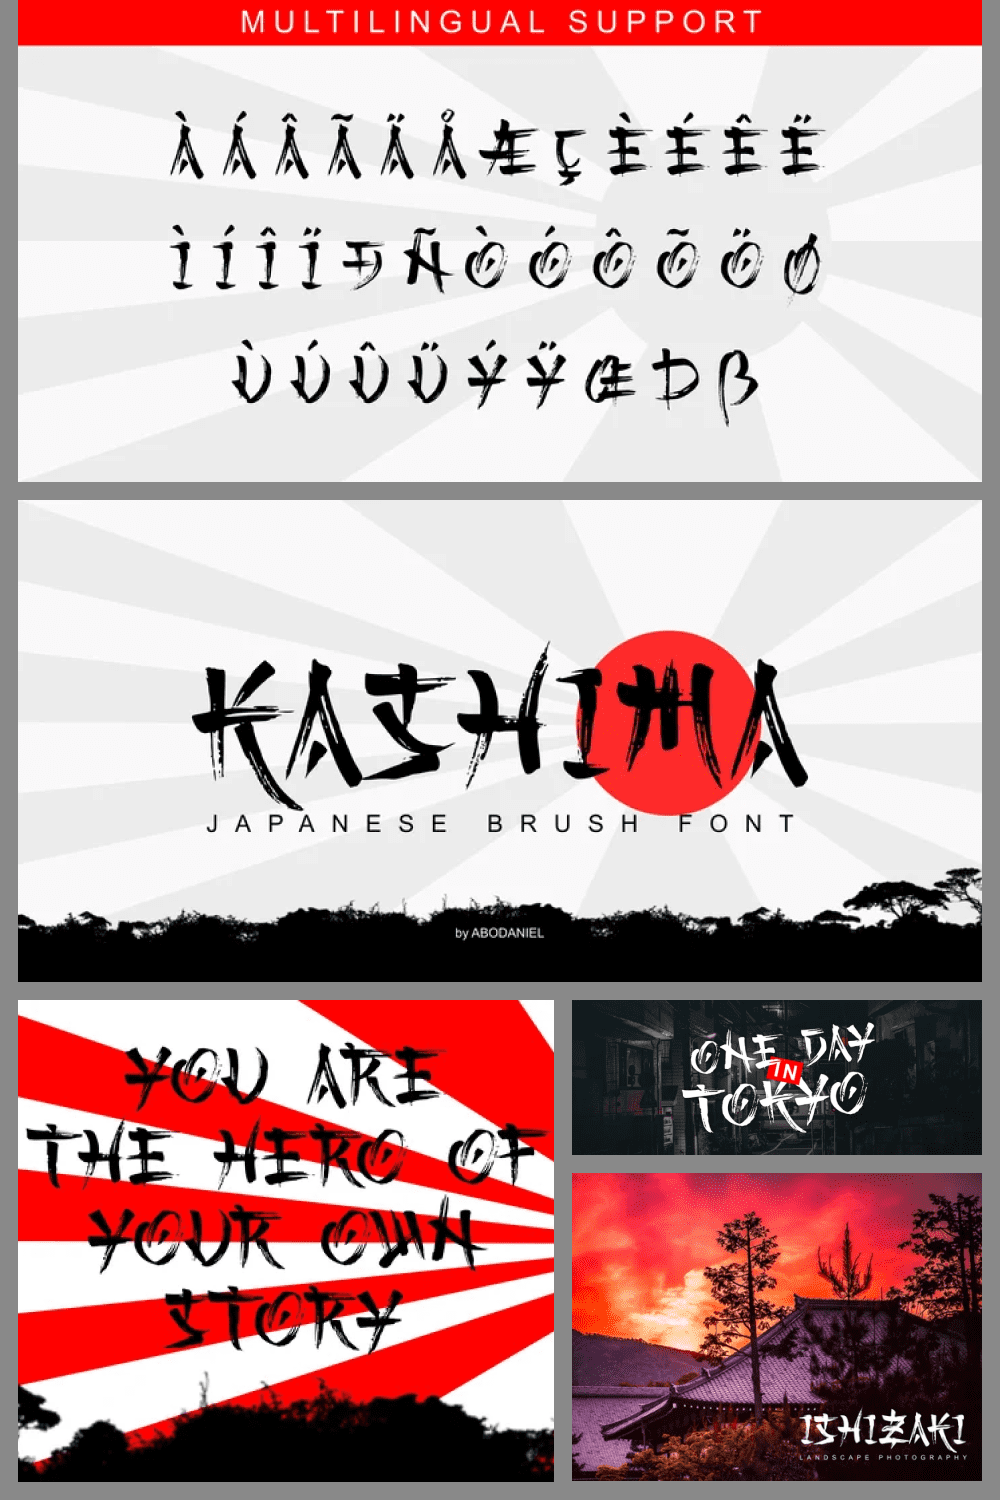 Kashima is brush font with Japanese style that made using the real brush pen. It looks very natural.